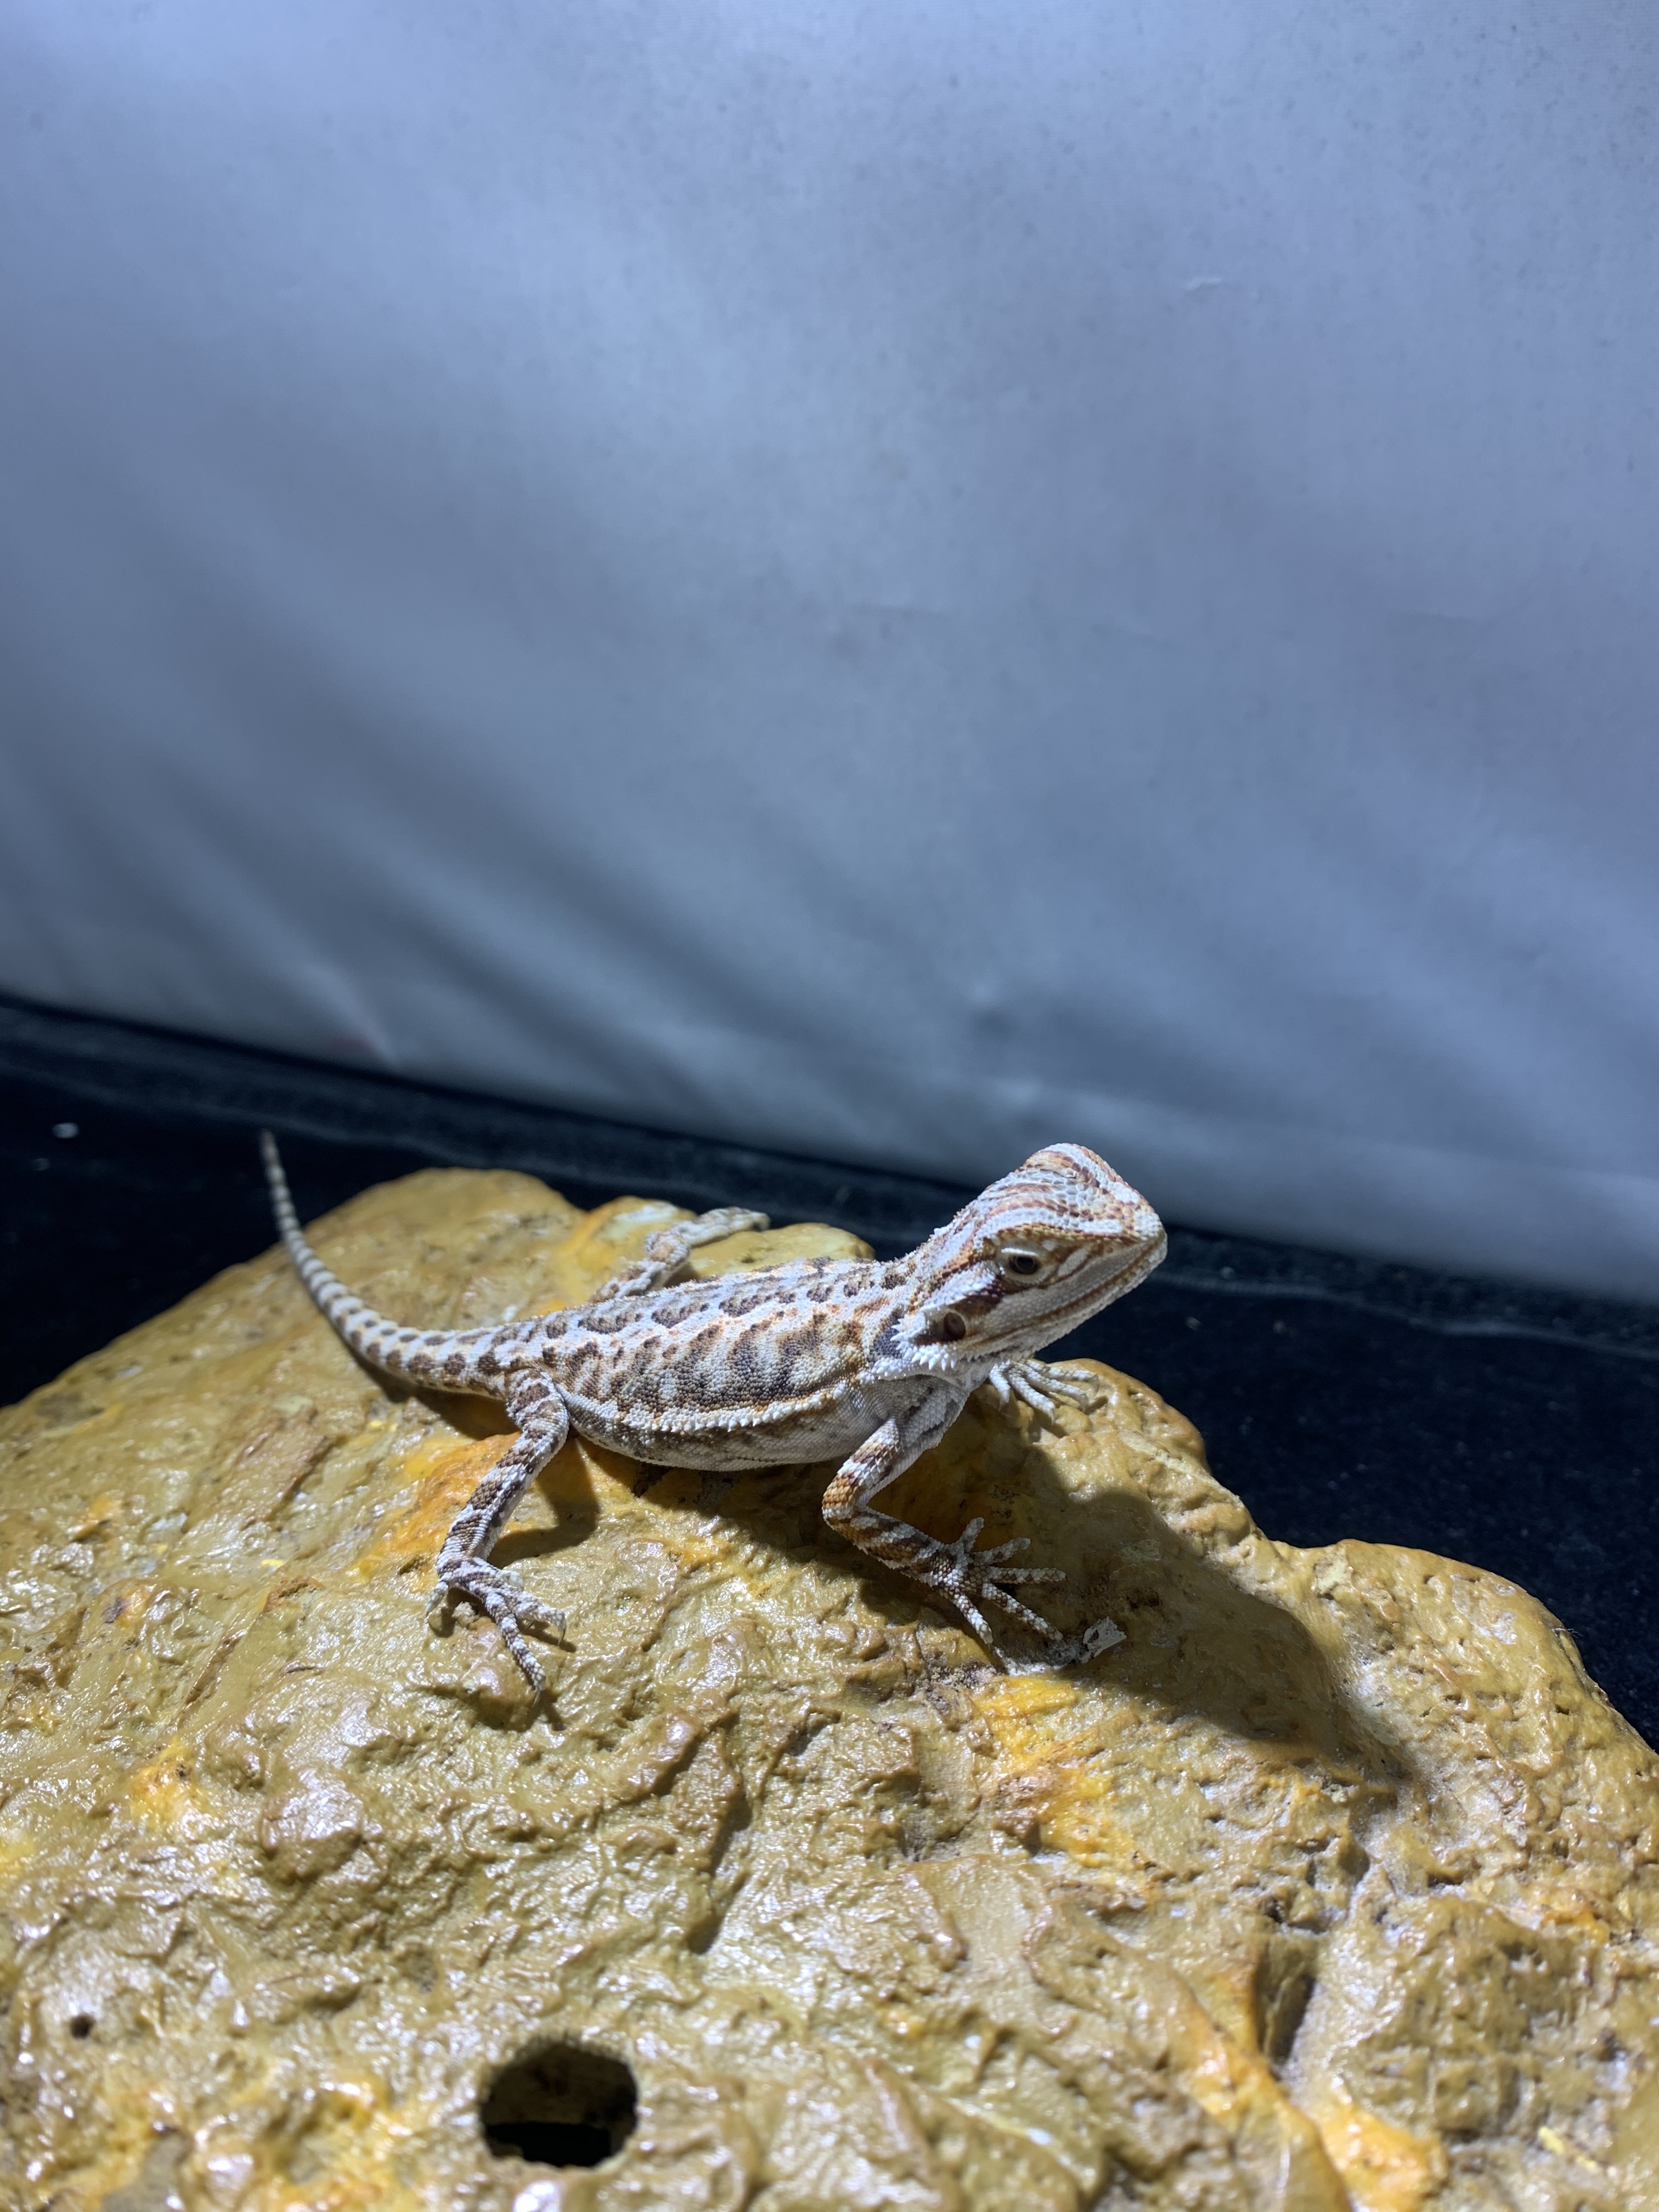 Leatherback Central Bearded Dragon by New Moon Reptiles, LLC